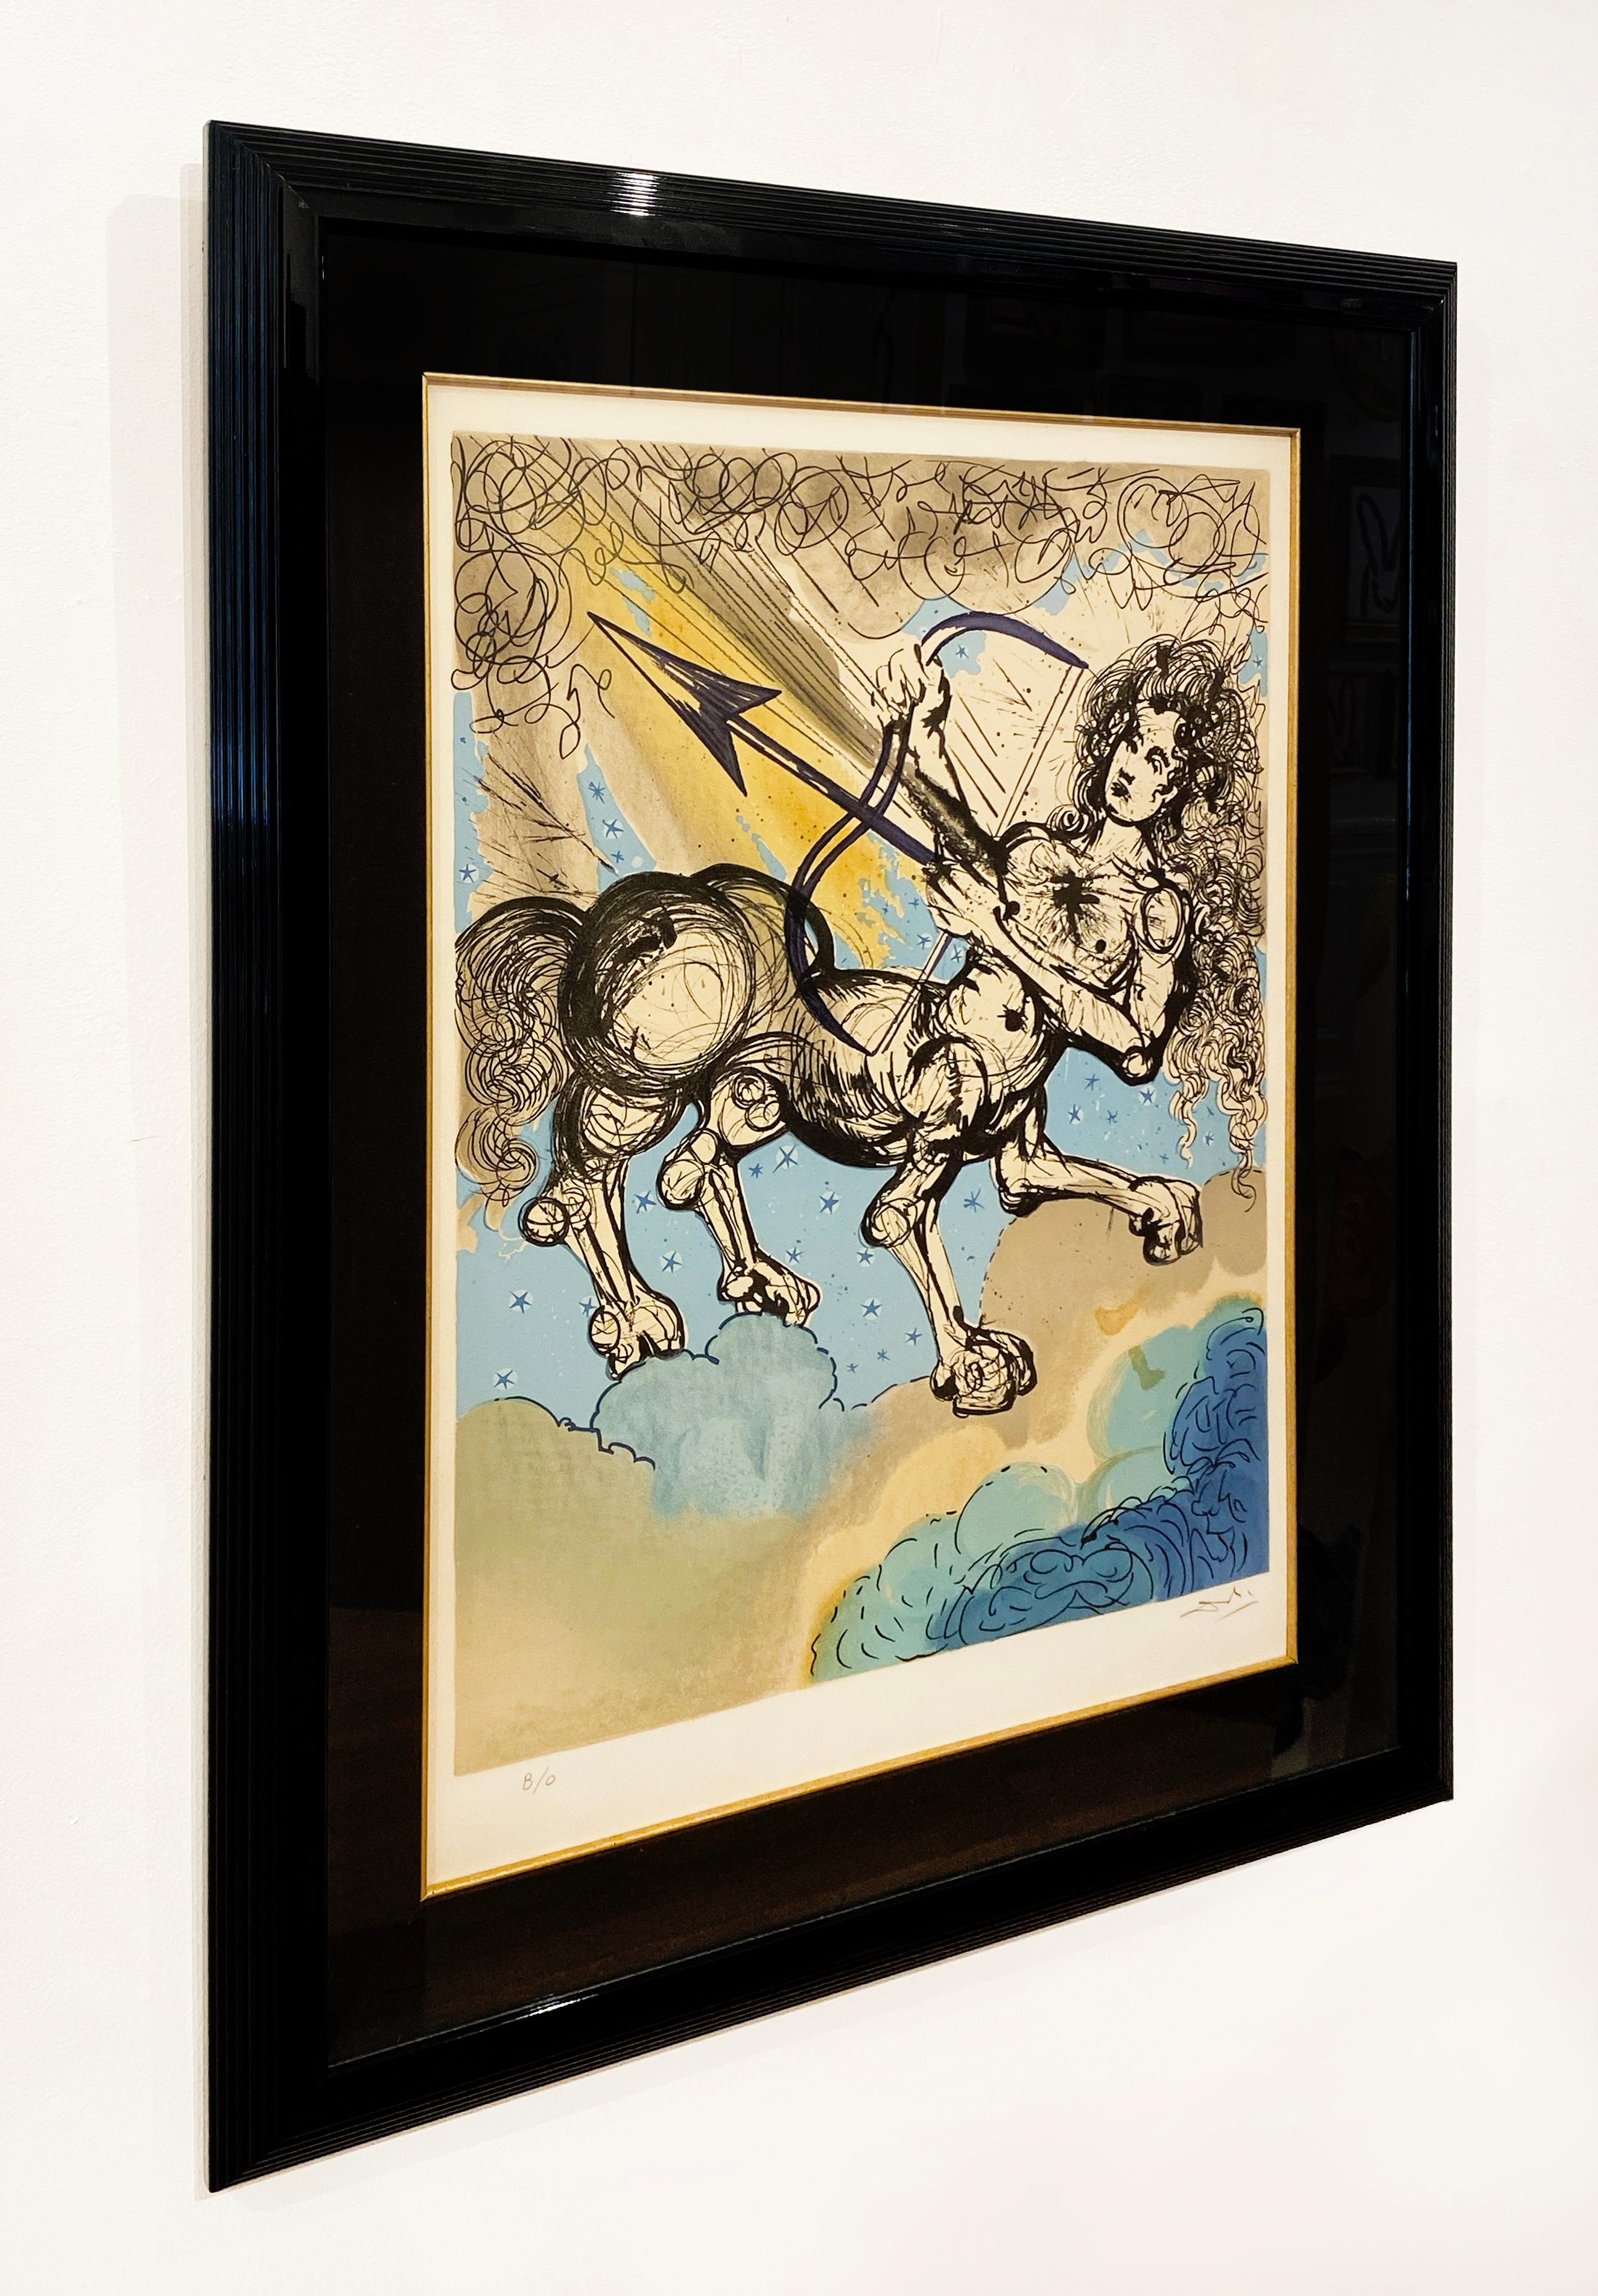 Artist:  Dali, Salvador
Title:  Sagittarius
Series:  Signs of the Zodiac
Date:  1967
Medium:  Lithograph printed in color
Framed Dimensions:  36.25